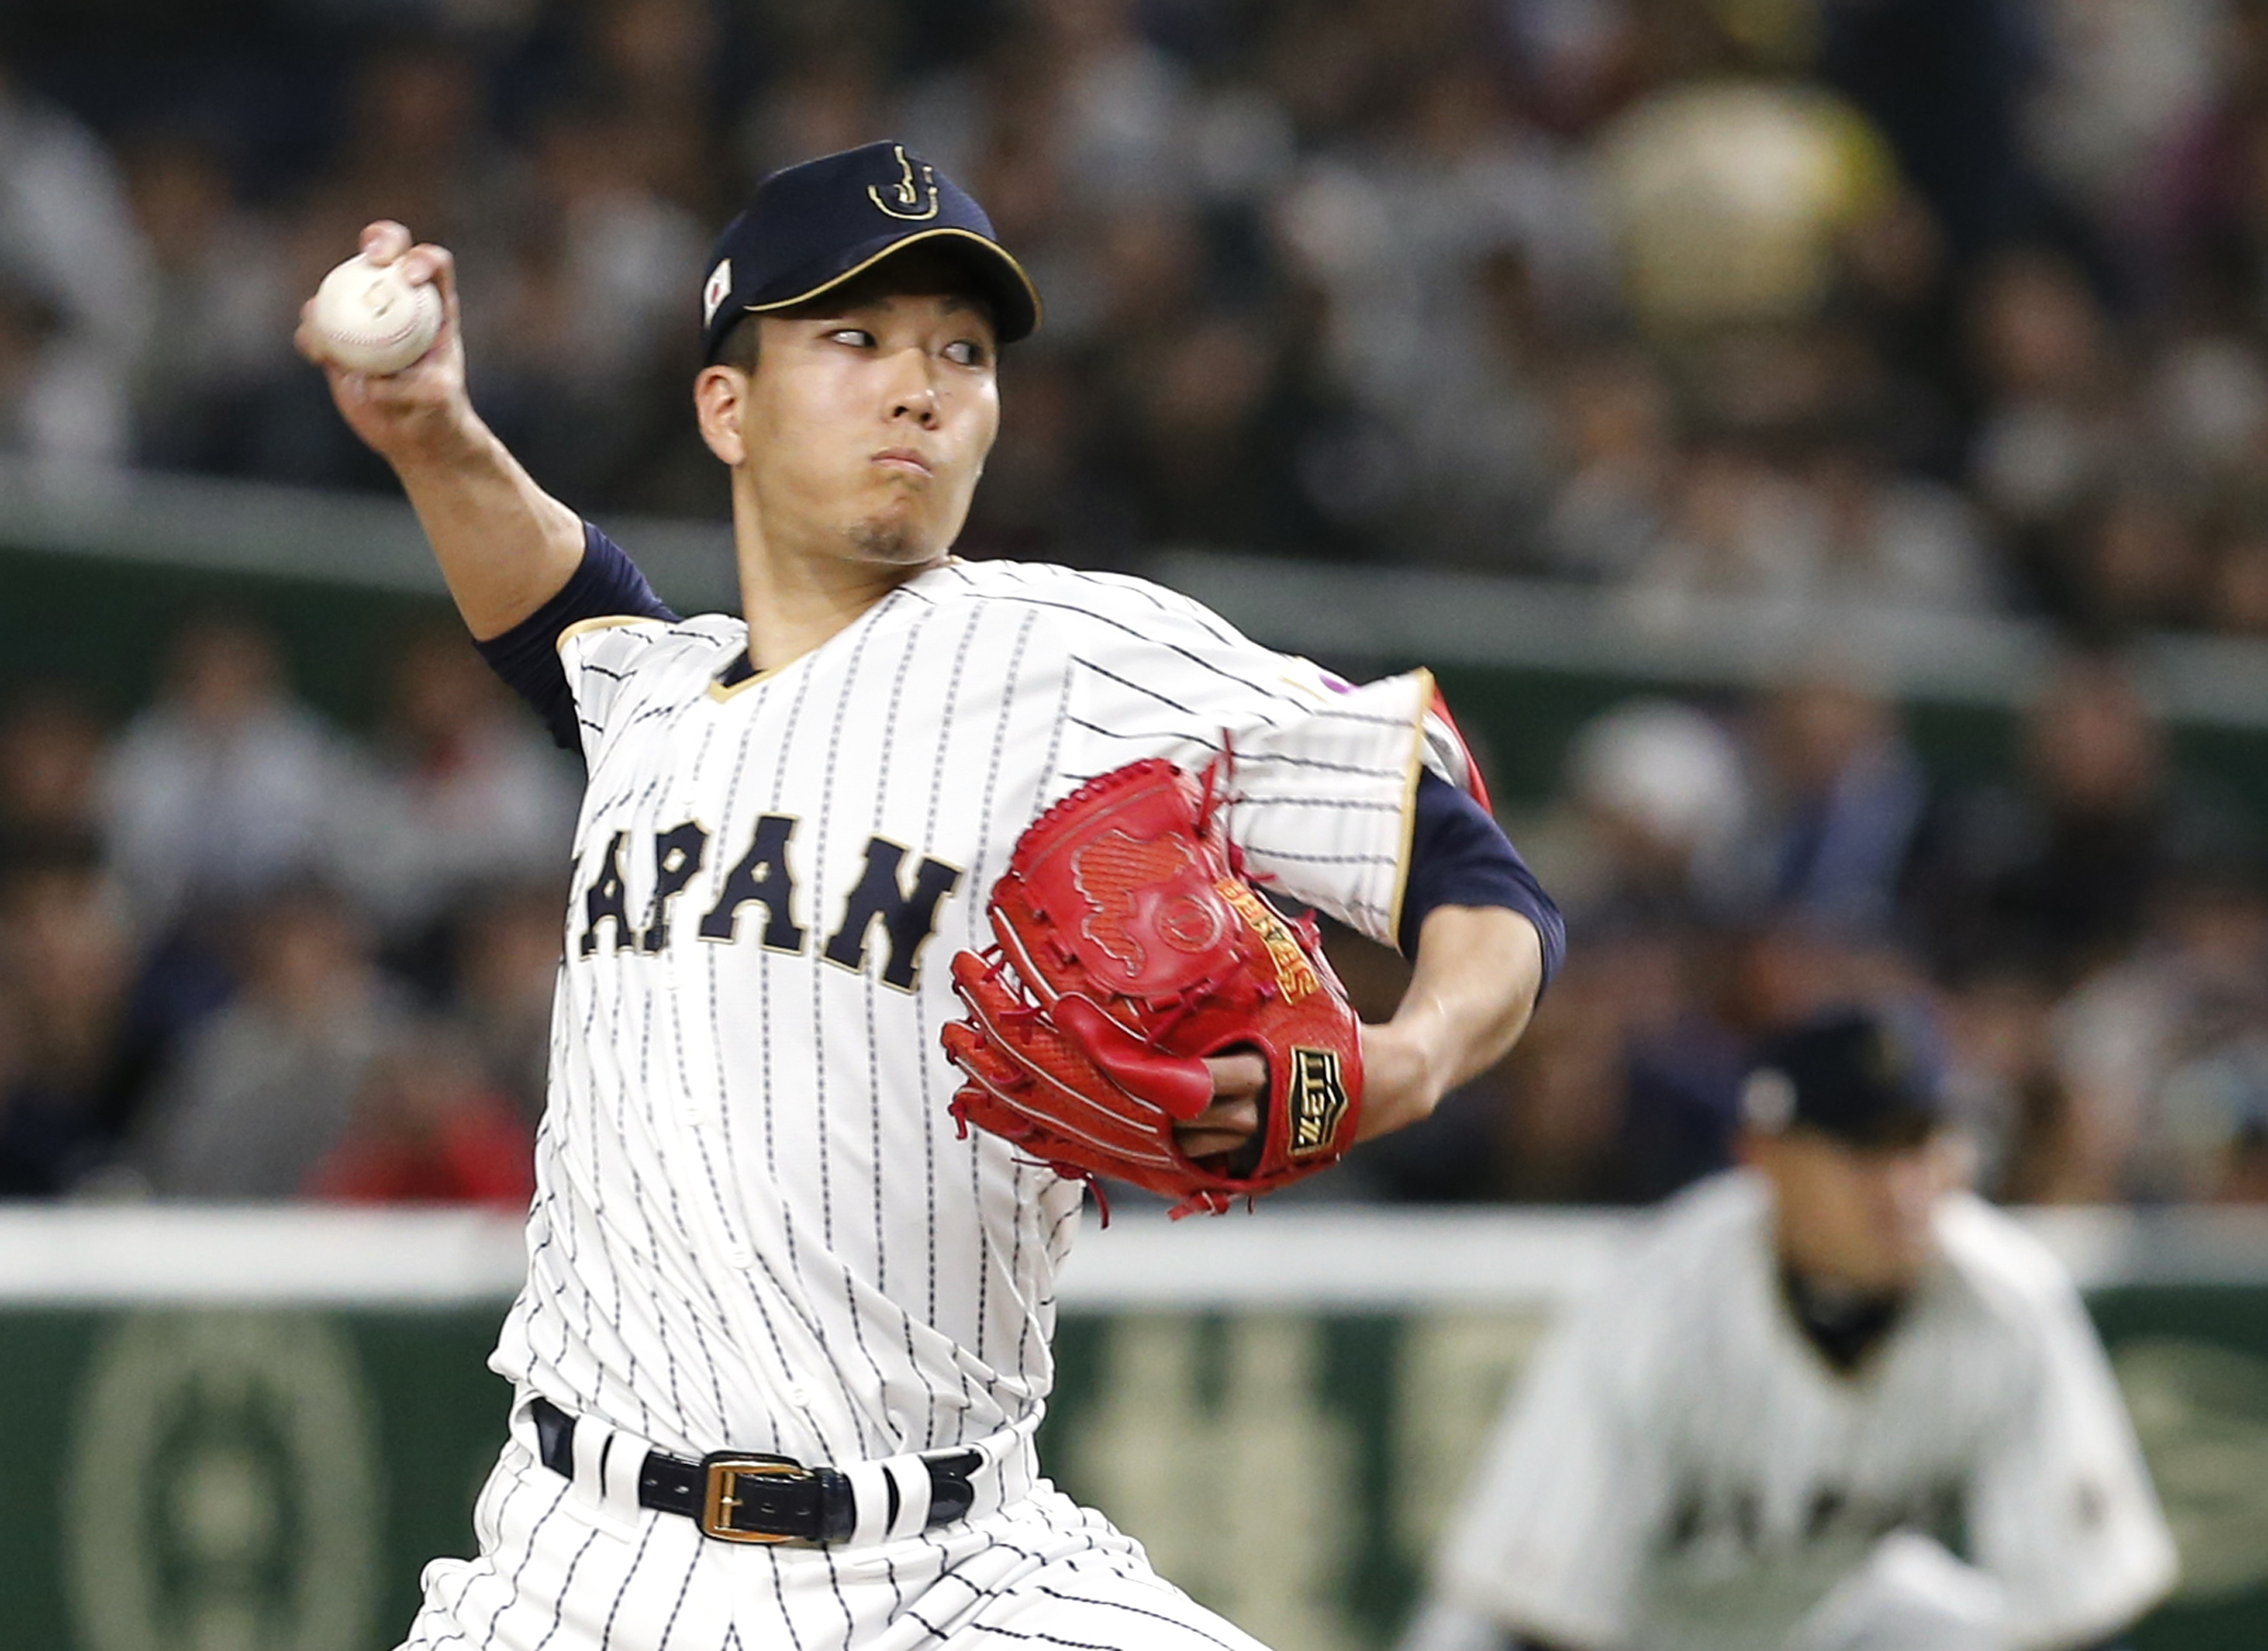 Report: Mets add latest pricey arm, land Japanese ace Senga for